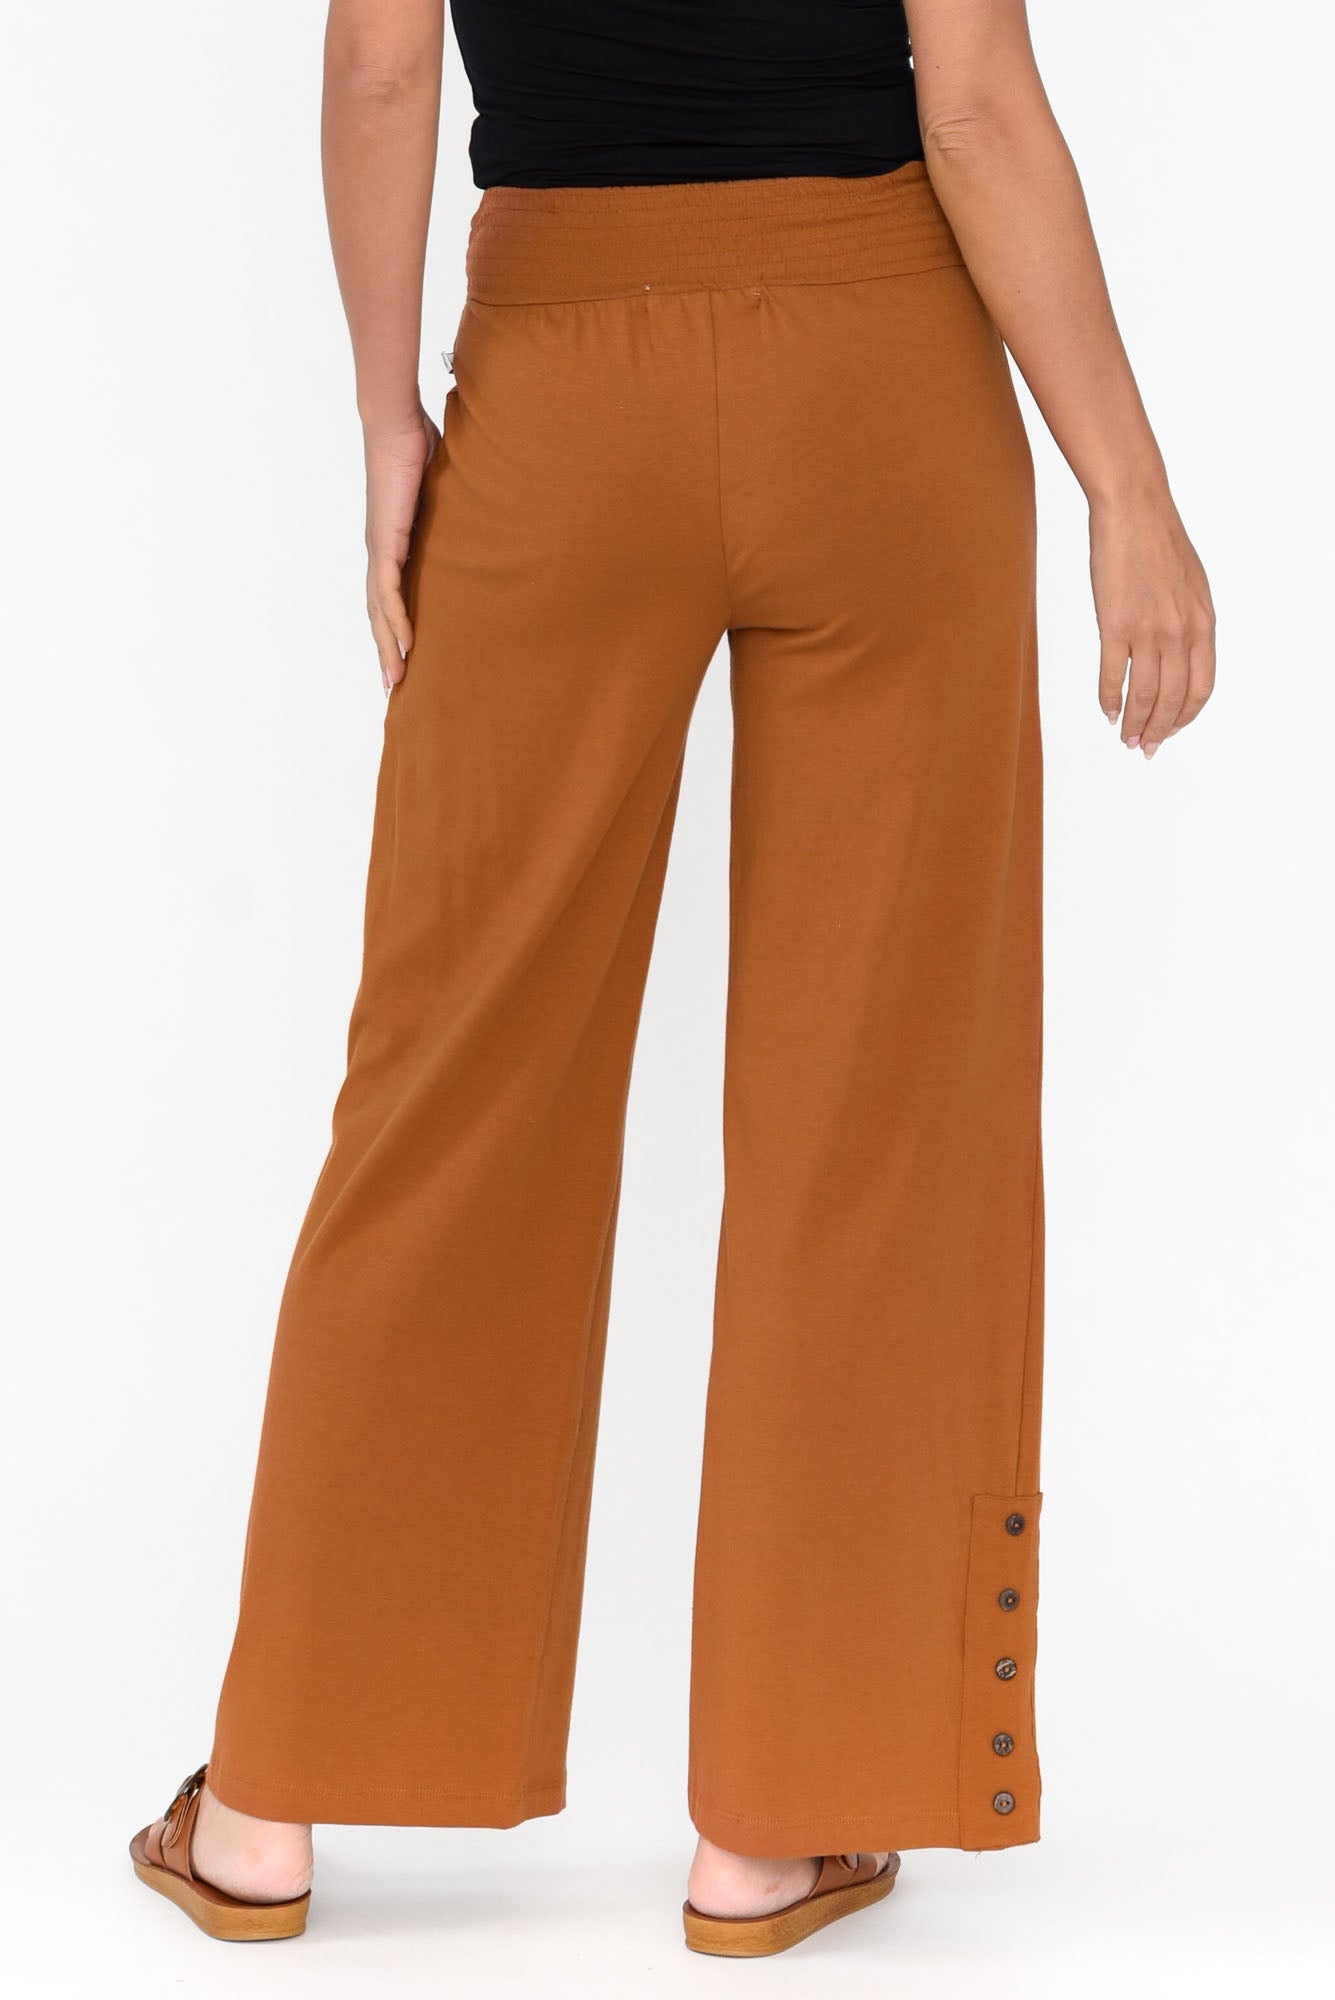 Angelica Rust Cotton Shirred Pants - Blue Bungalow